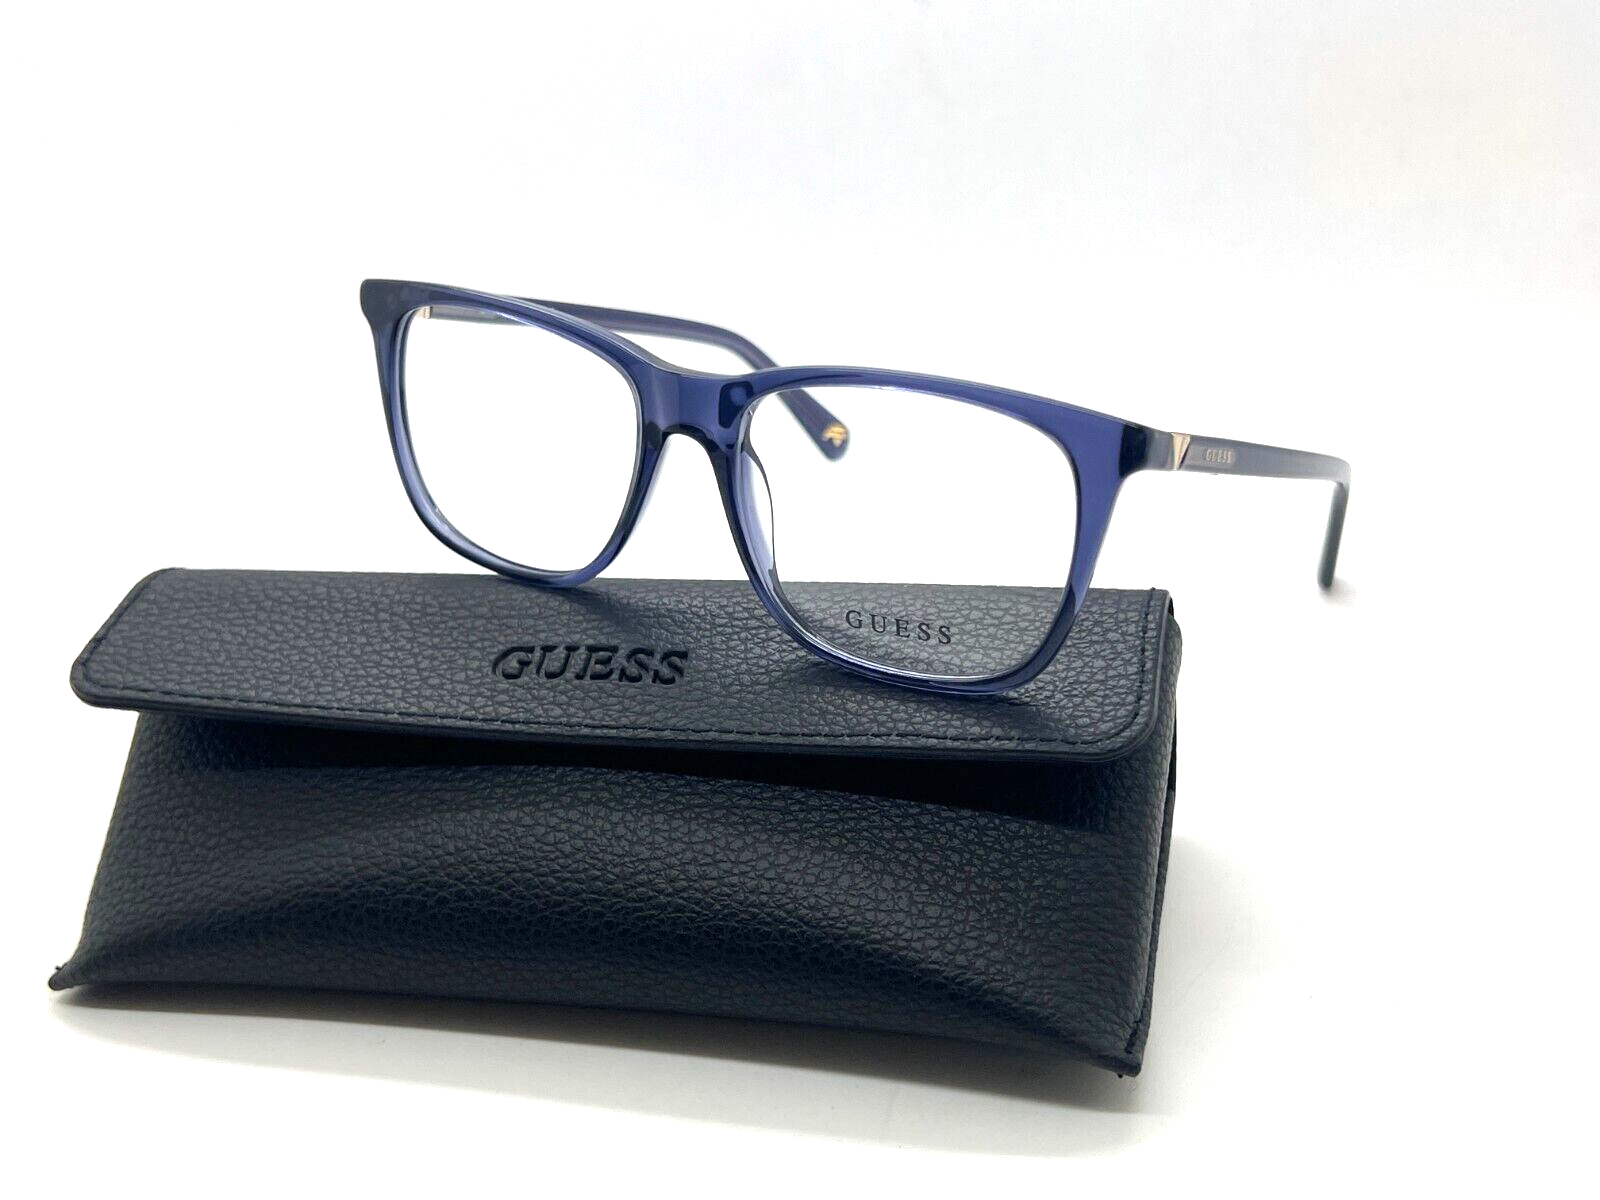 NEW Authentic GUESS GU5223 090 BLUE 52-16-145MM Eyeglasses FRAME - £27.24 GBP